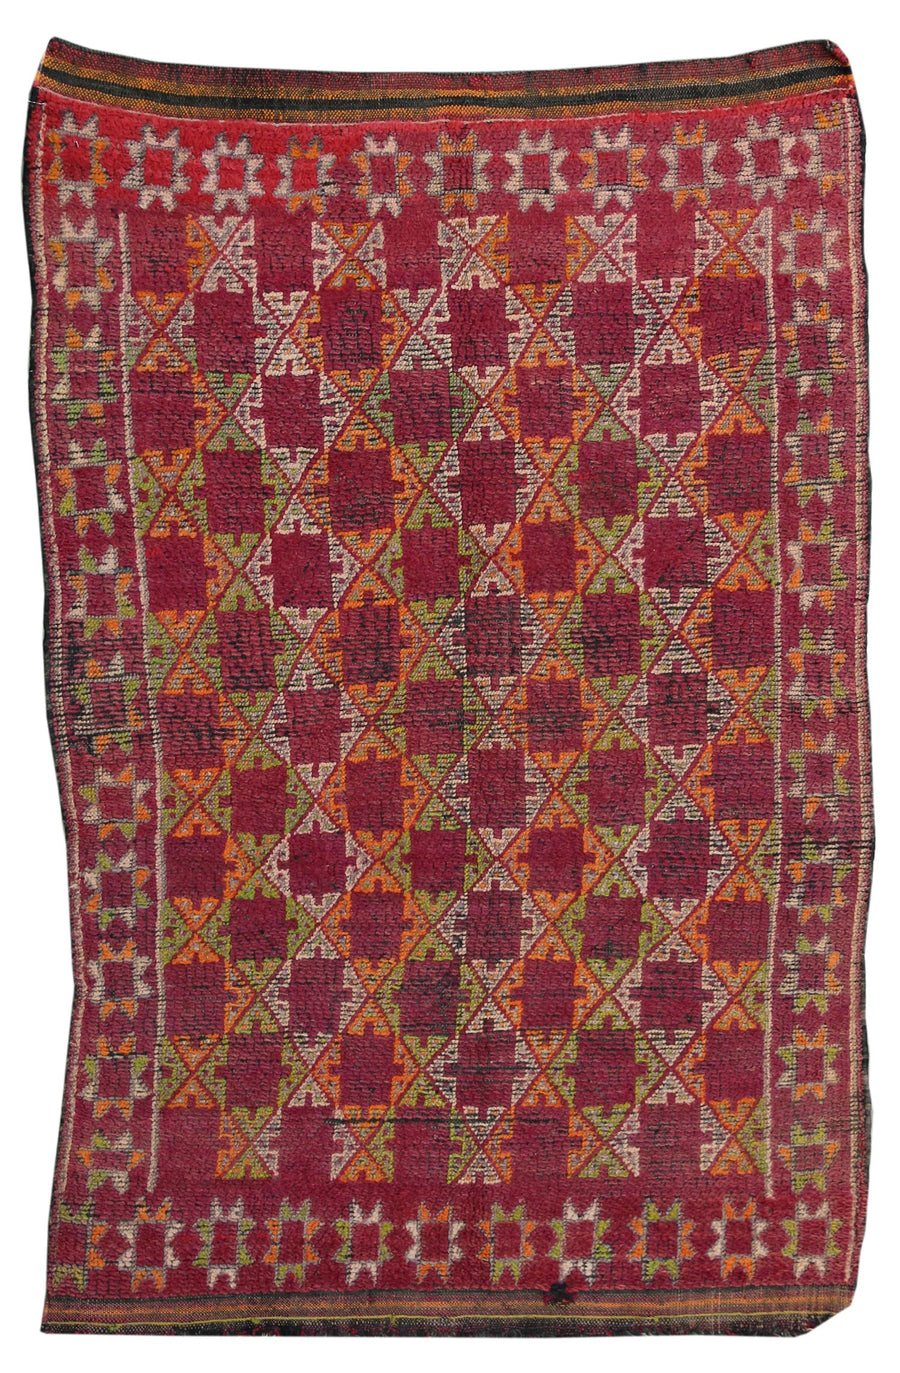 MOROCCAN HANDKNOTTED RUG, 61914